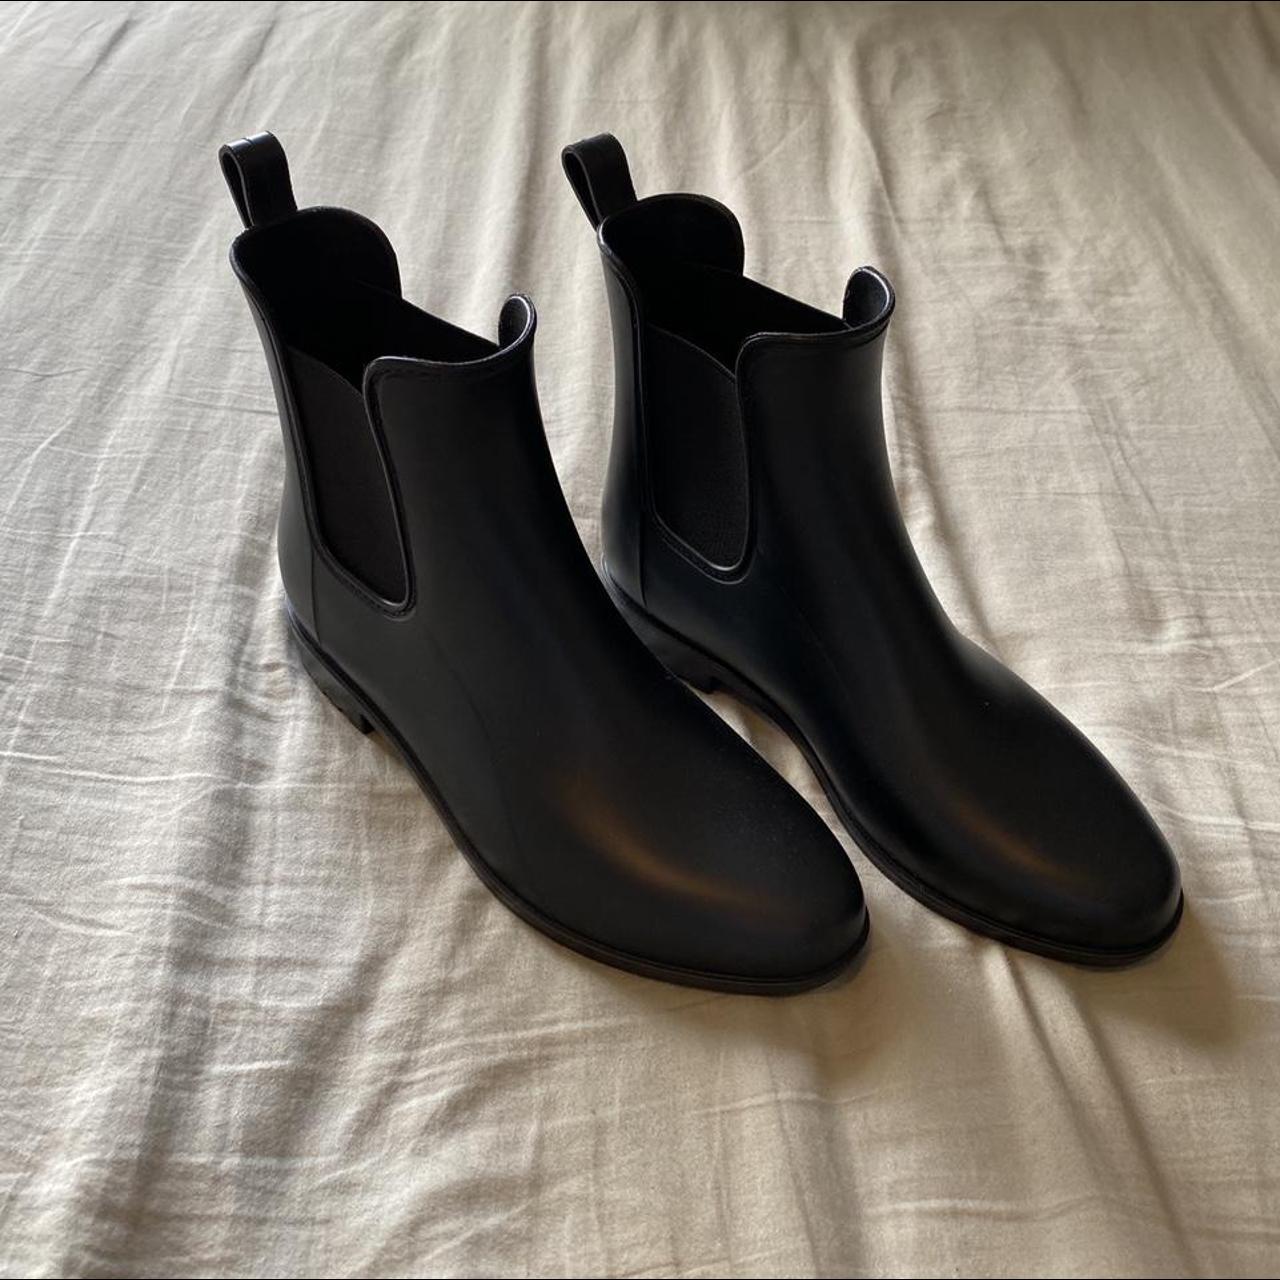 Black matte rain boots by A New Day (Target), size... - Depop